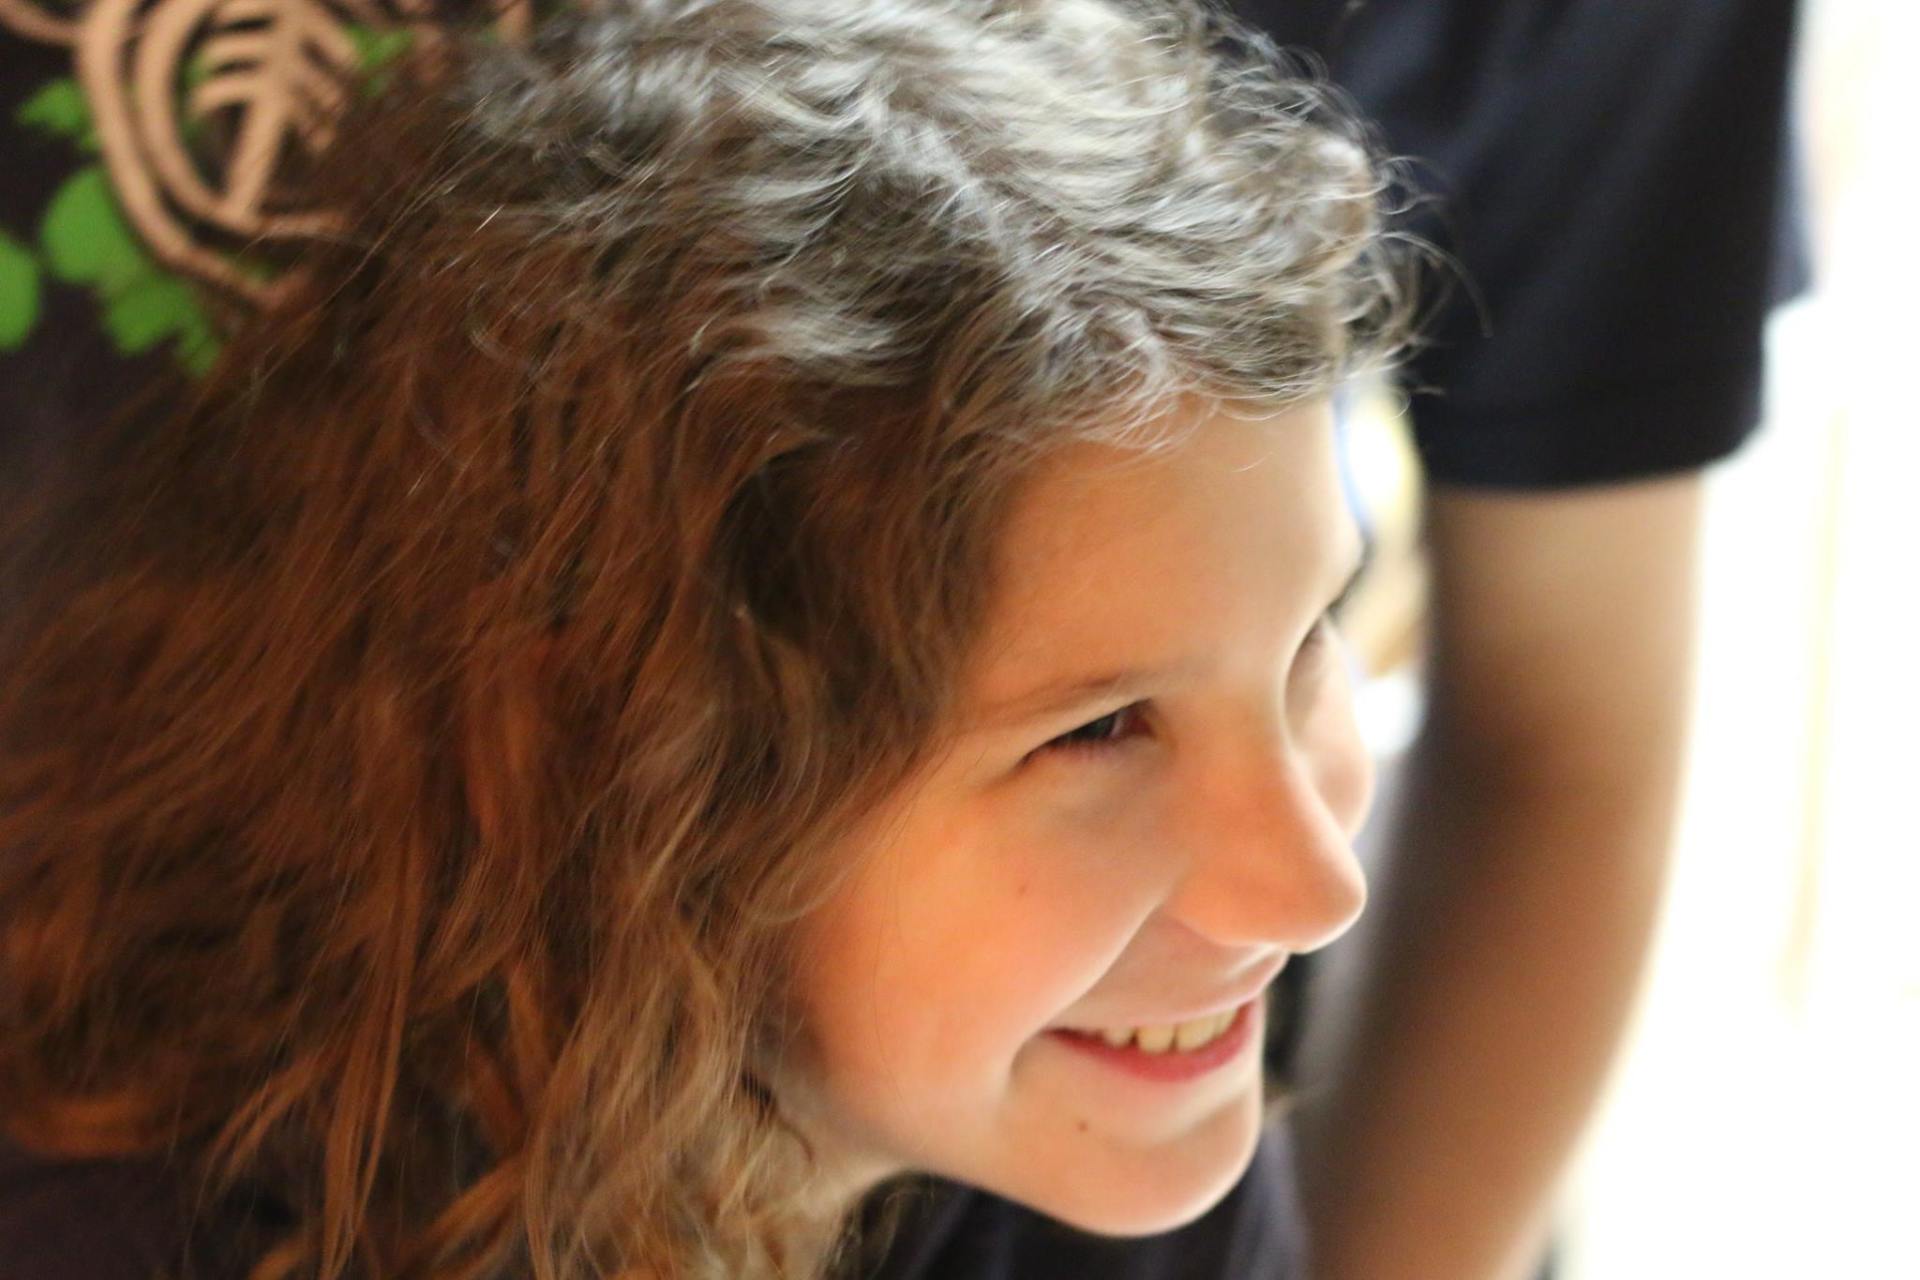 A young girl with curly hair is smiling for the camera.